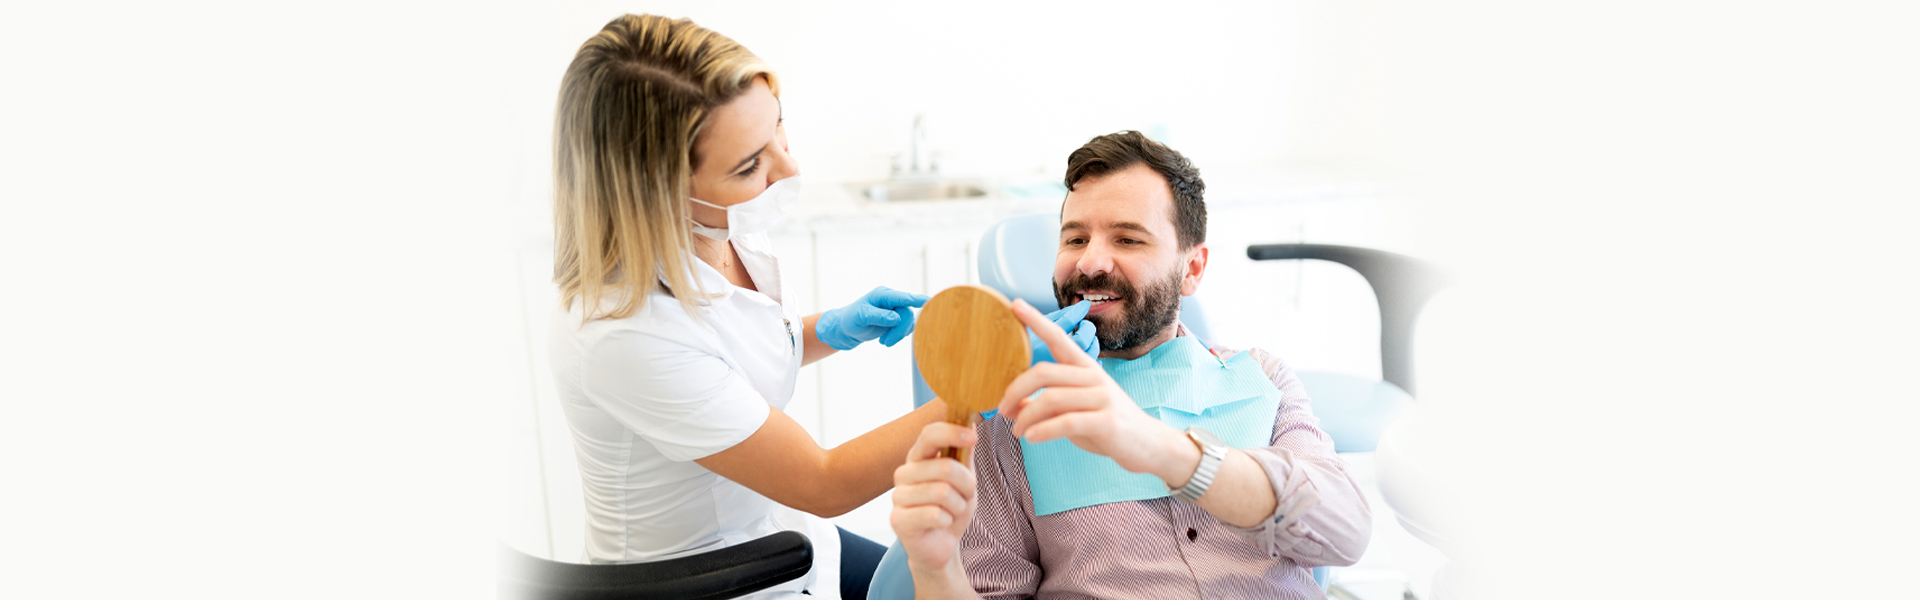 Dental Implants Are Excellent Missing Teeth Replacements: What Are the Reasons?